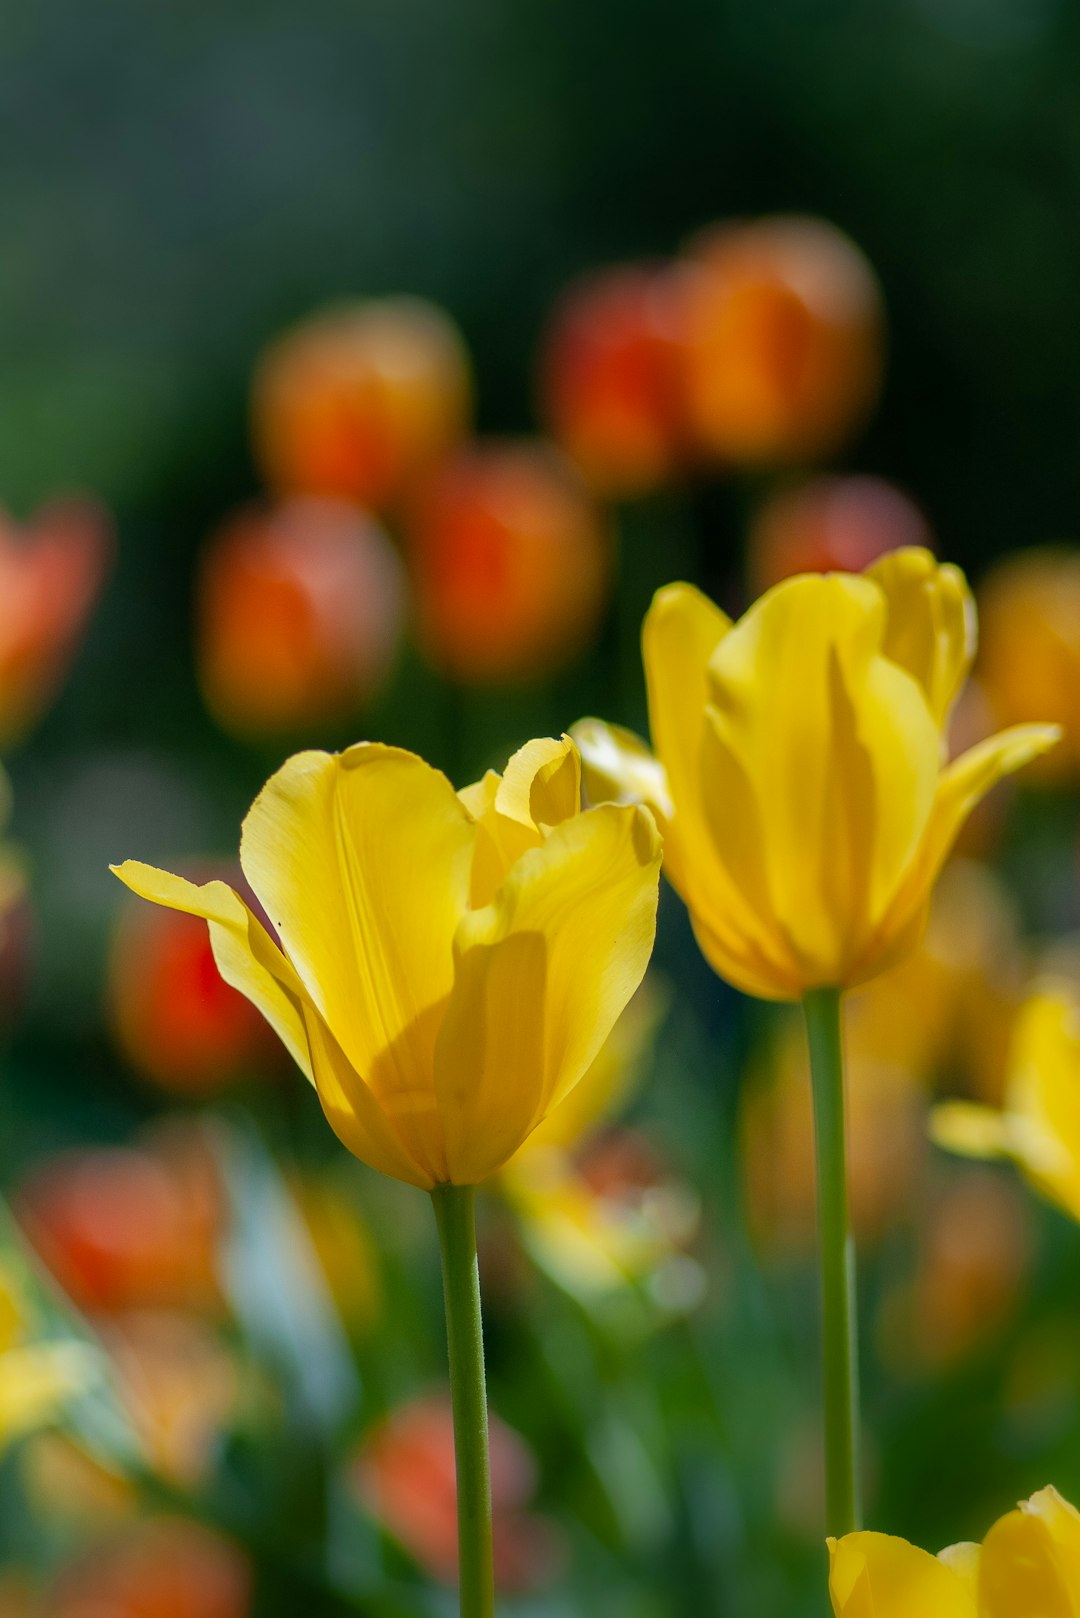 selective focus photo of two yellow-petaled flowesr